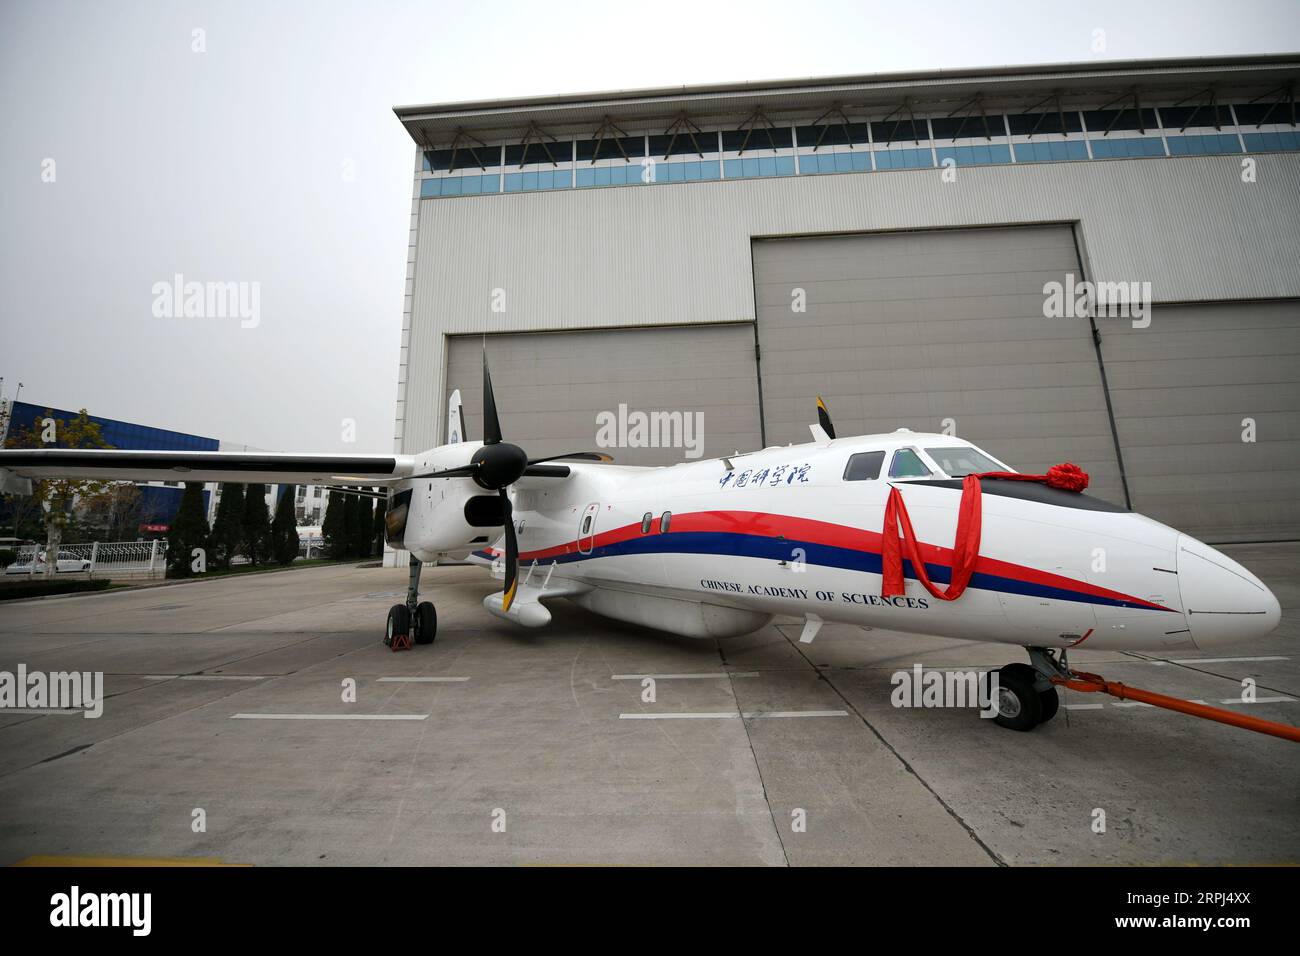 191127 -- XI AN, Nov. 27, 2019 -- Photo taken on Nov. 27, 2019 shows a Xinzhou-60 aircraft for remote sensing in Xi an, northwest China s Shaanxi Province. China s aircraft maker Xi an Aircraft Industry Co. XAC has delivered two high-performance Xinzhou-60 aircraft for remote sensing to the Chinese Academy of Sciences CAS for aerial observation missions. Ding Yaxiu, chief designer of the aircraft, said the aerial observation aircraft is adapted from the Xinzhou-60 aircraft developed by the company to better address the demand of carrying different functional equipment for diversified observati Stock Photo